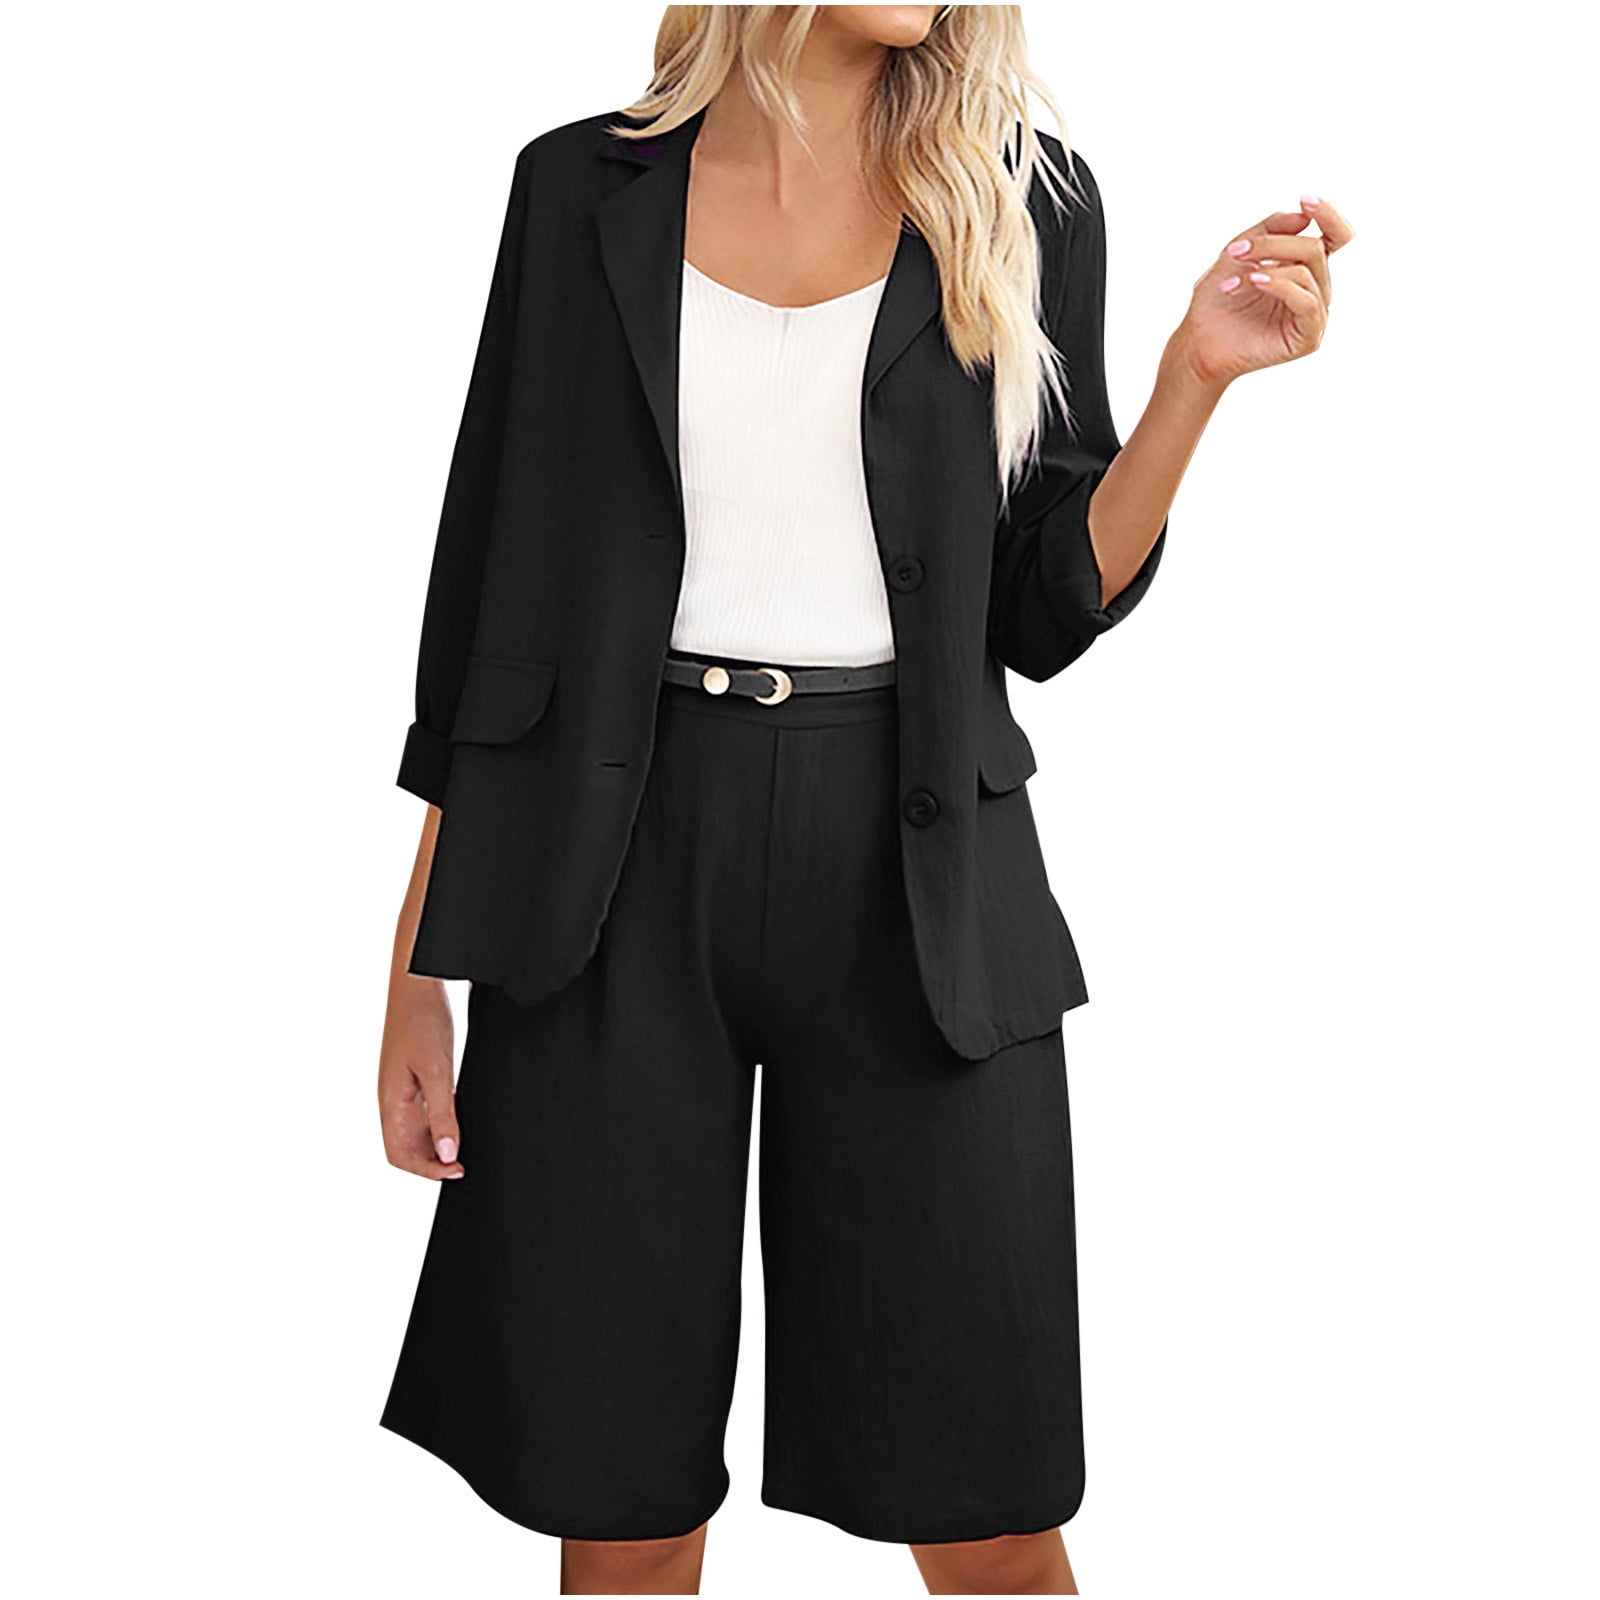 REORIAFEE Womens Business Casual Outfits Date Night Outfit Women's